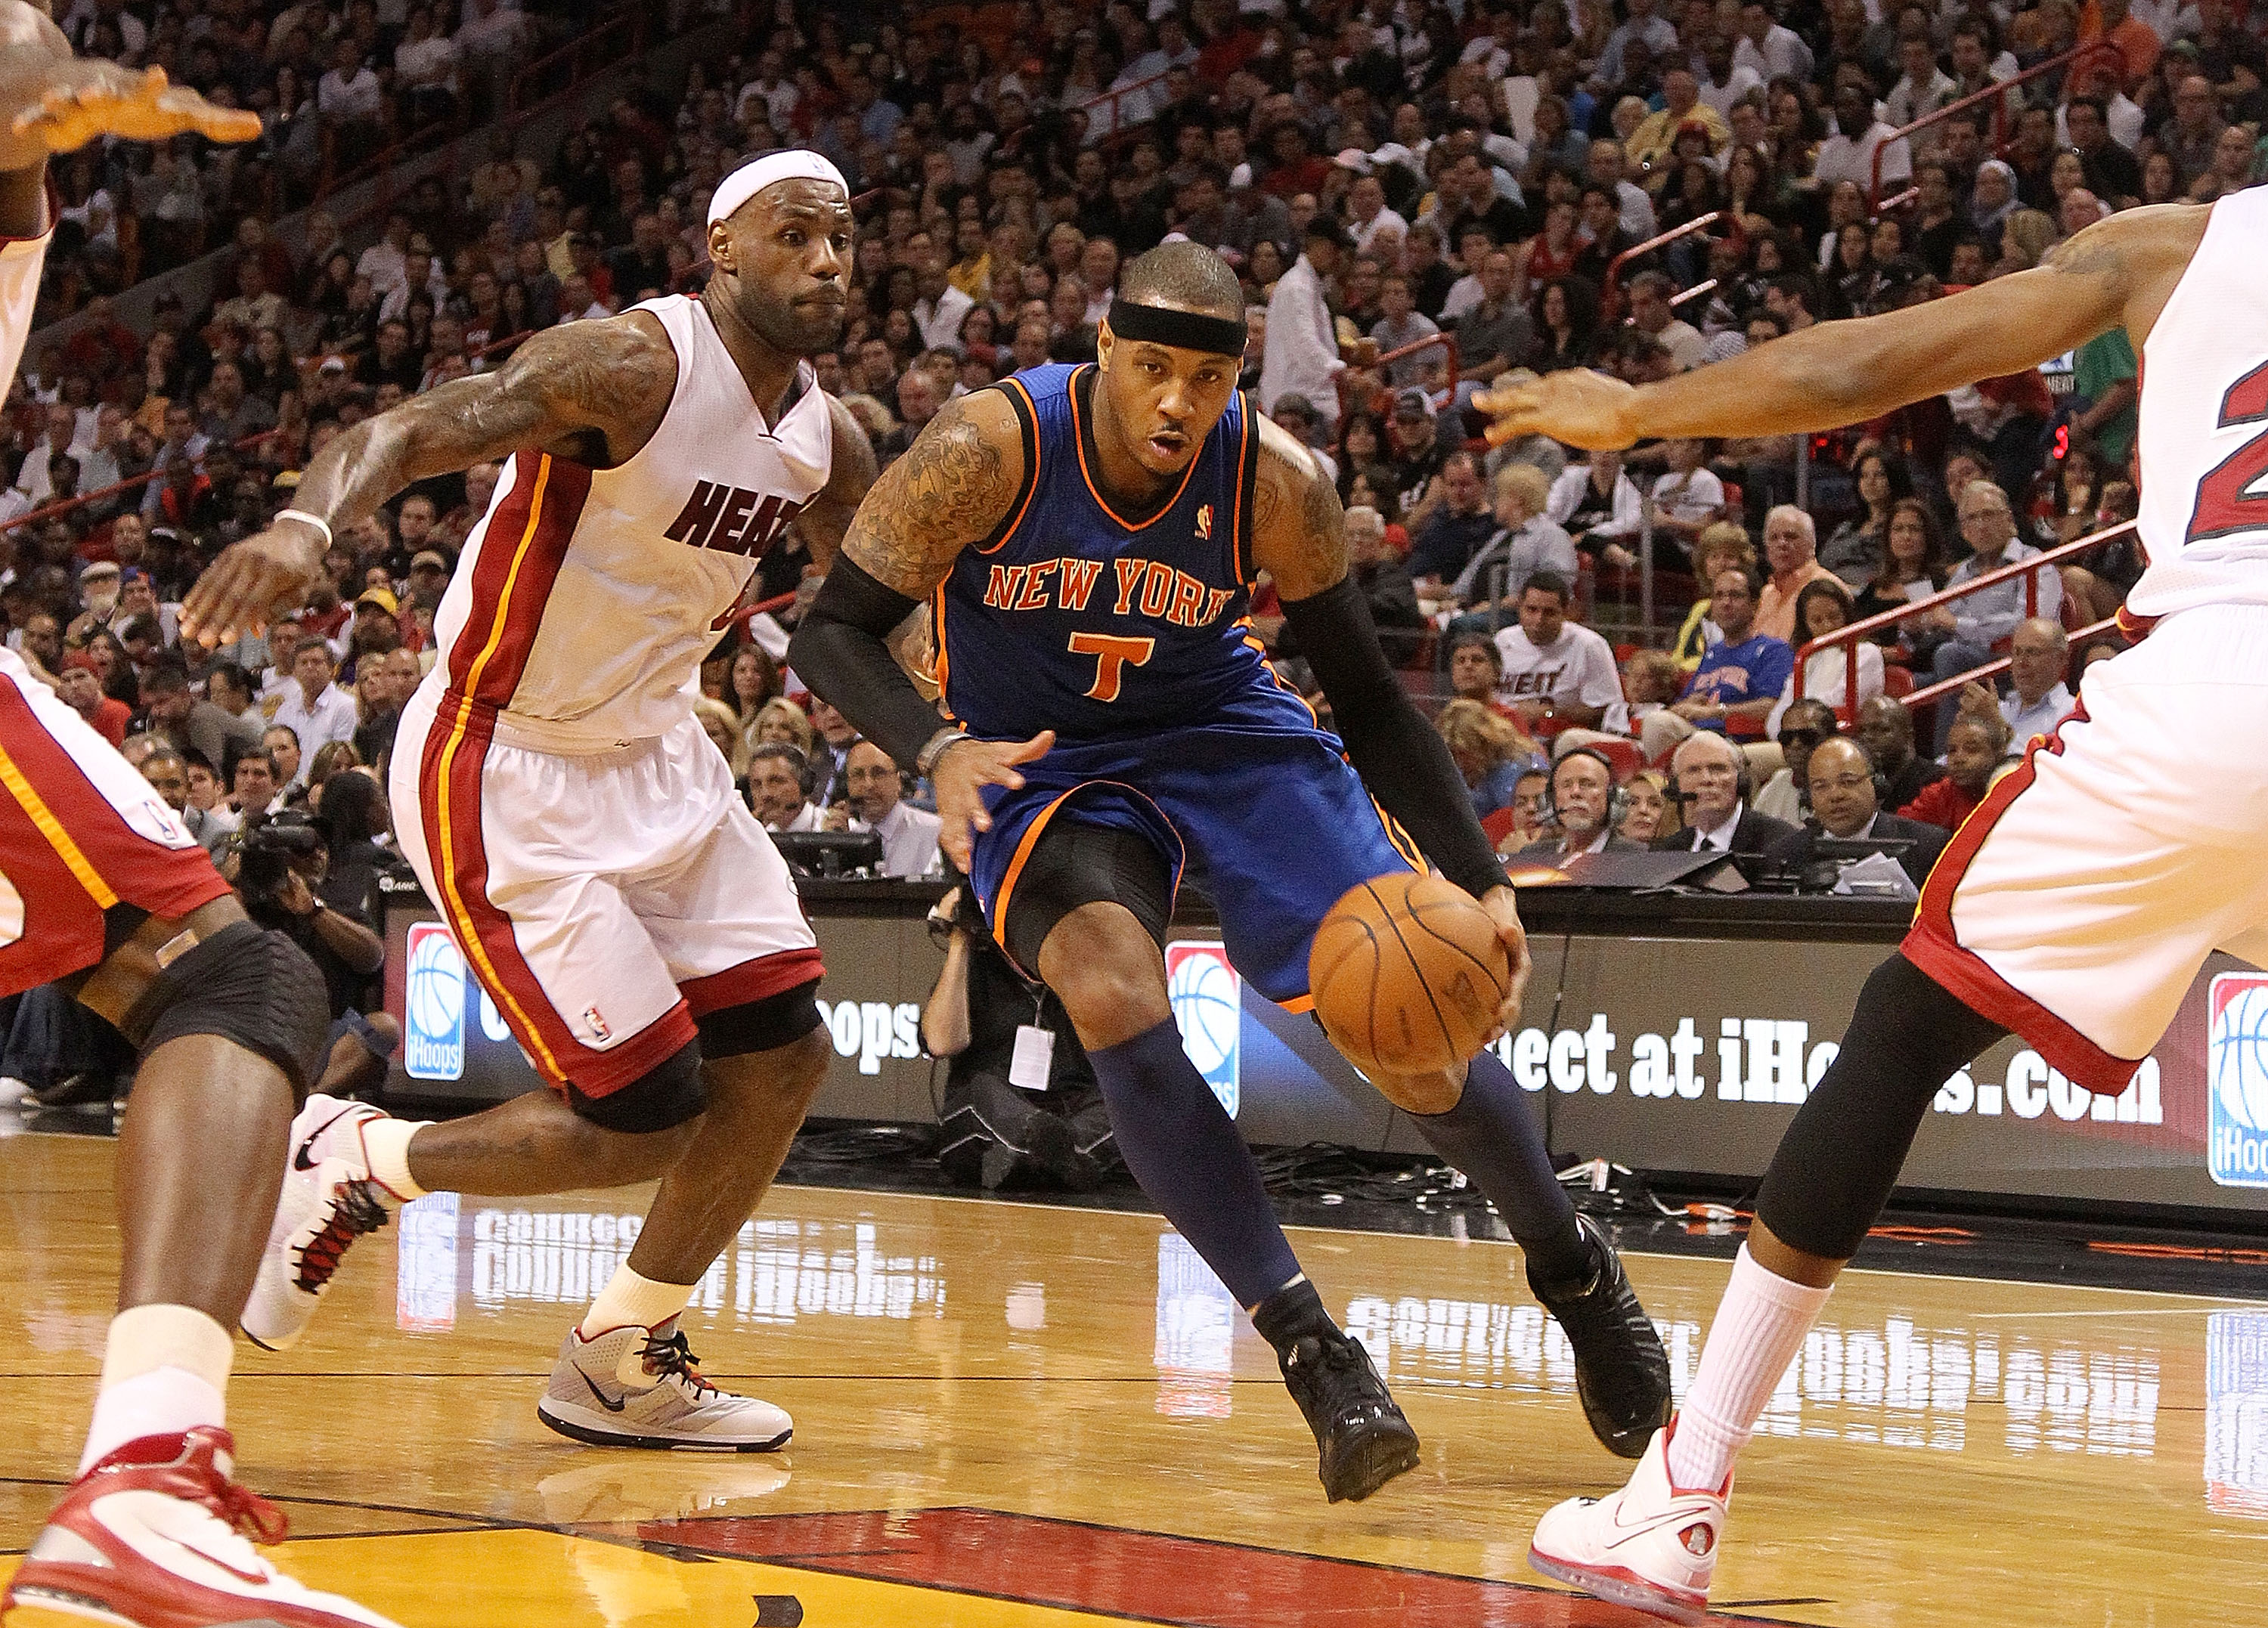 MIAMI, FL - FEBRUARY 27:  Carmelo Anthony #7 of the New York Knicks drives past LeBron James #6 of the Miami Heat during a game at American Airlines Arena on February 27, 2011 in Miami, Florida. NOTE TO USER: User expressly acknowledges and agrees that, b